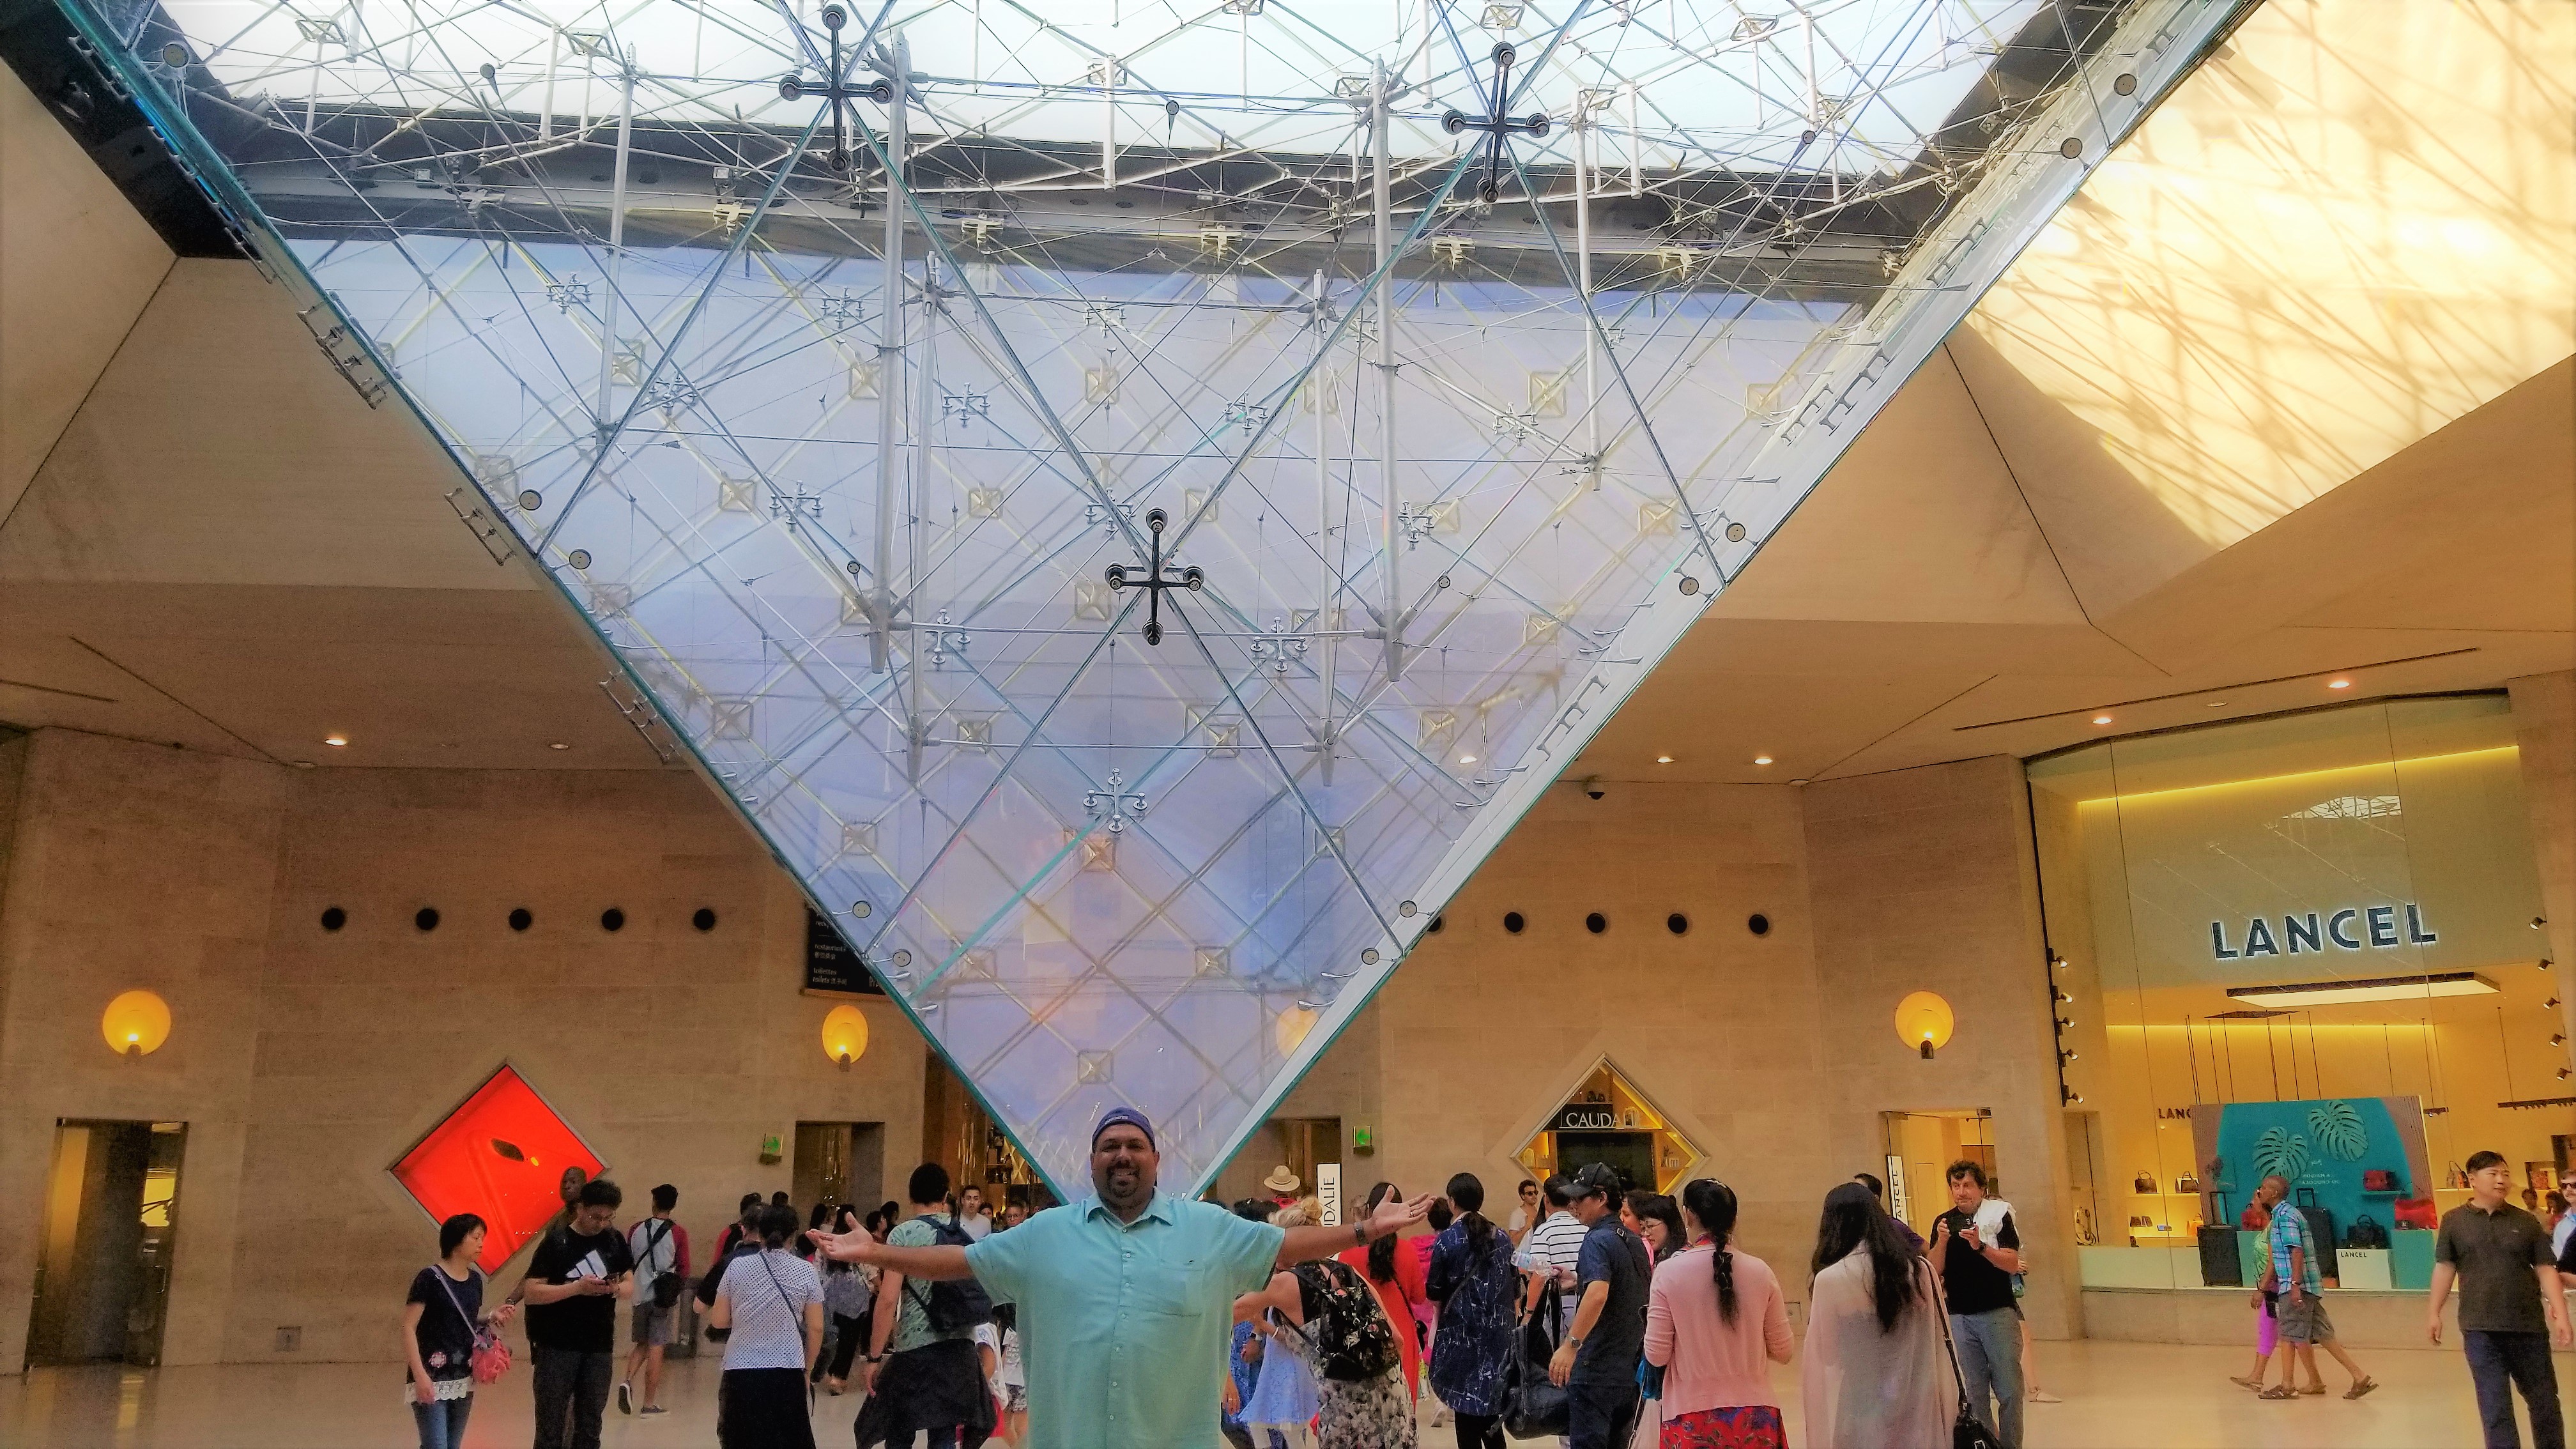 Me and the inverse pyramid